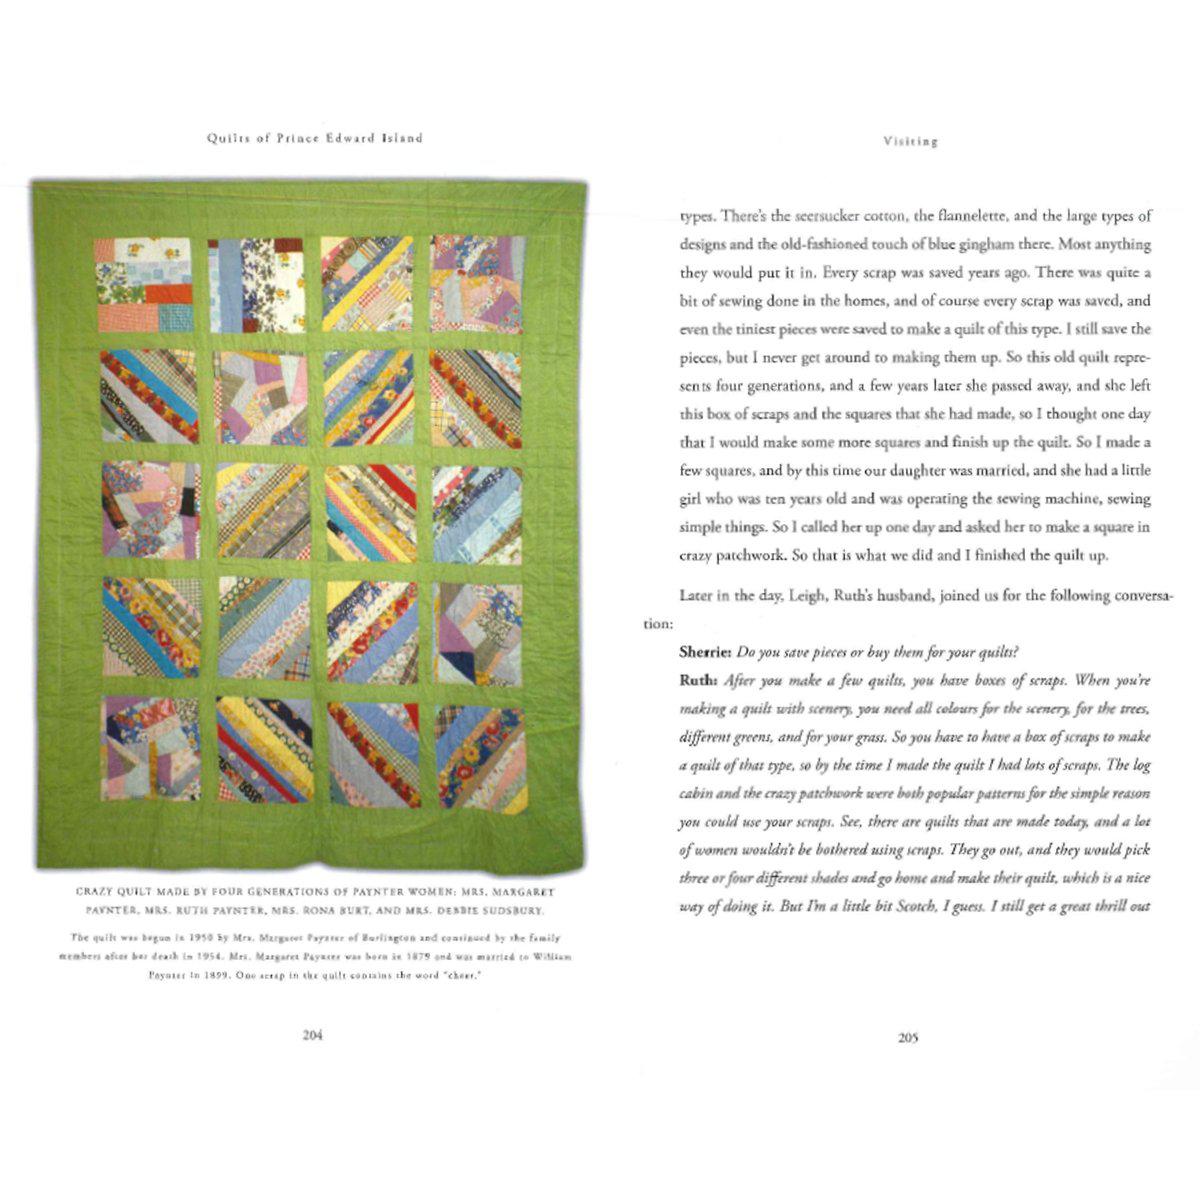 "Quilts of Prince Edward Island: The Fabric of Rural Life" By Sherrie Davidson